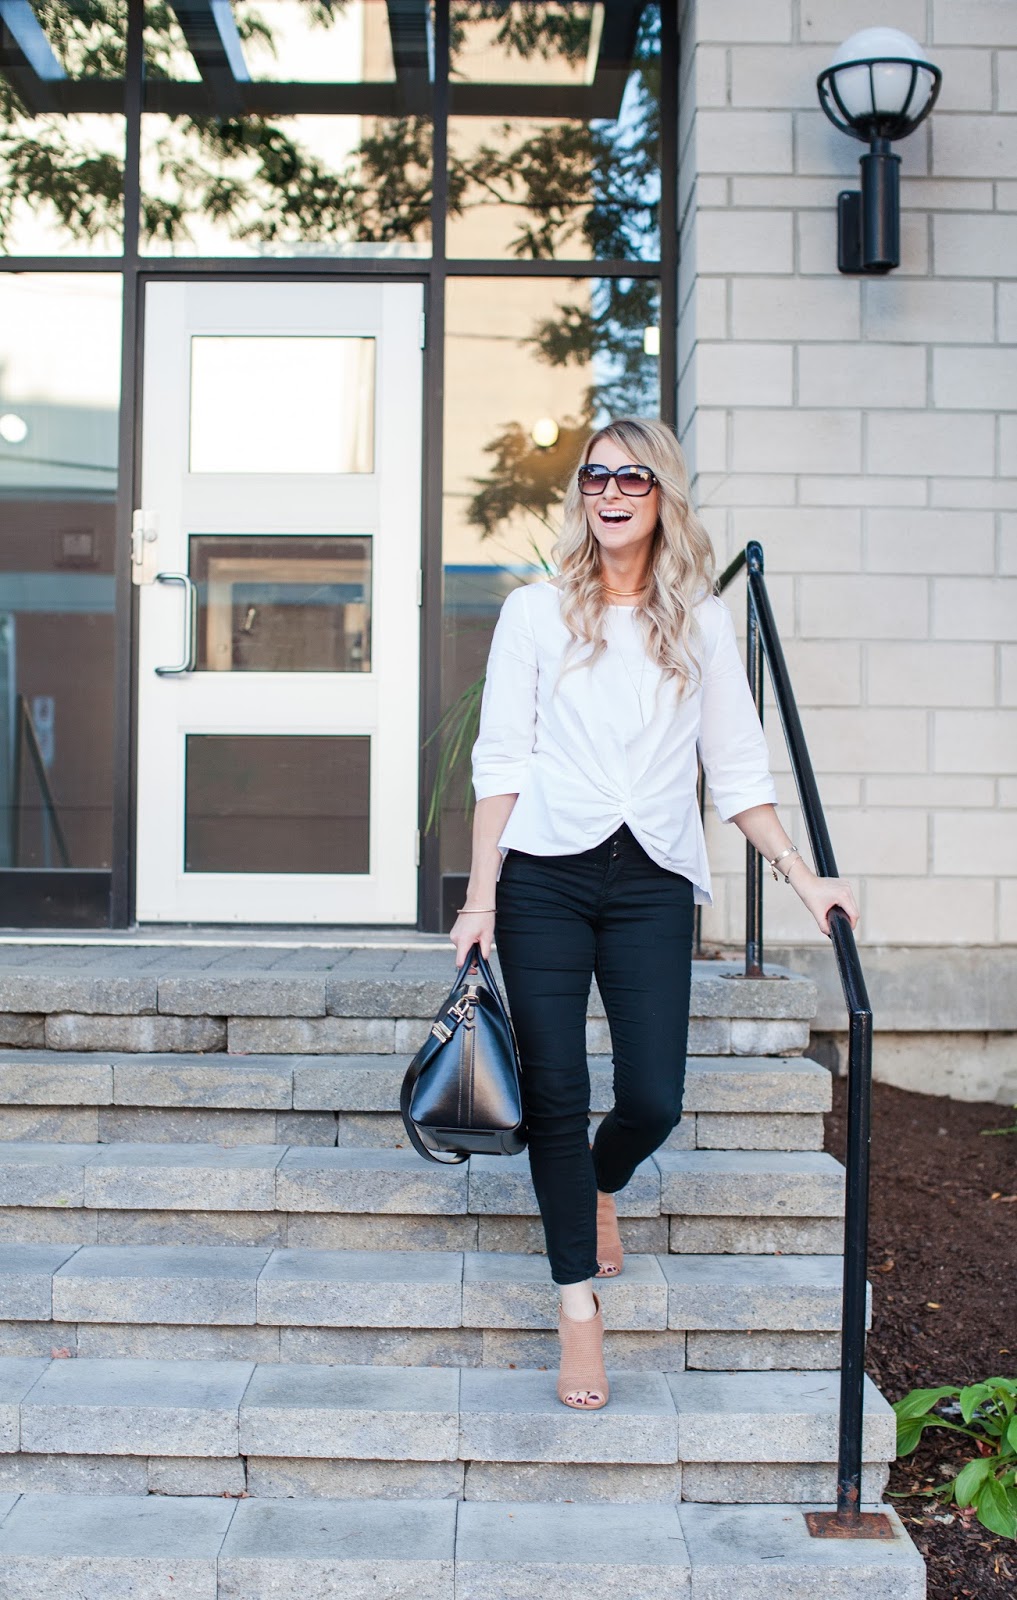 TIE FRONT BLOUSE & EASY BUSINESS CASUAL STYLE | A.Co est. 1984